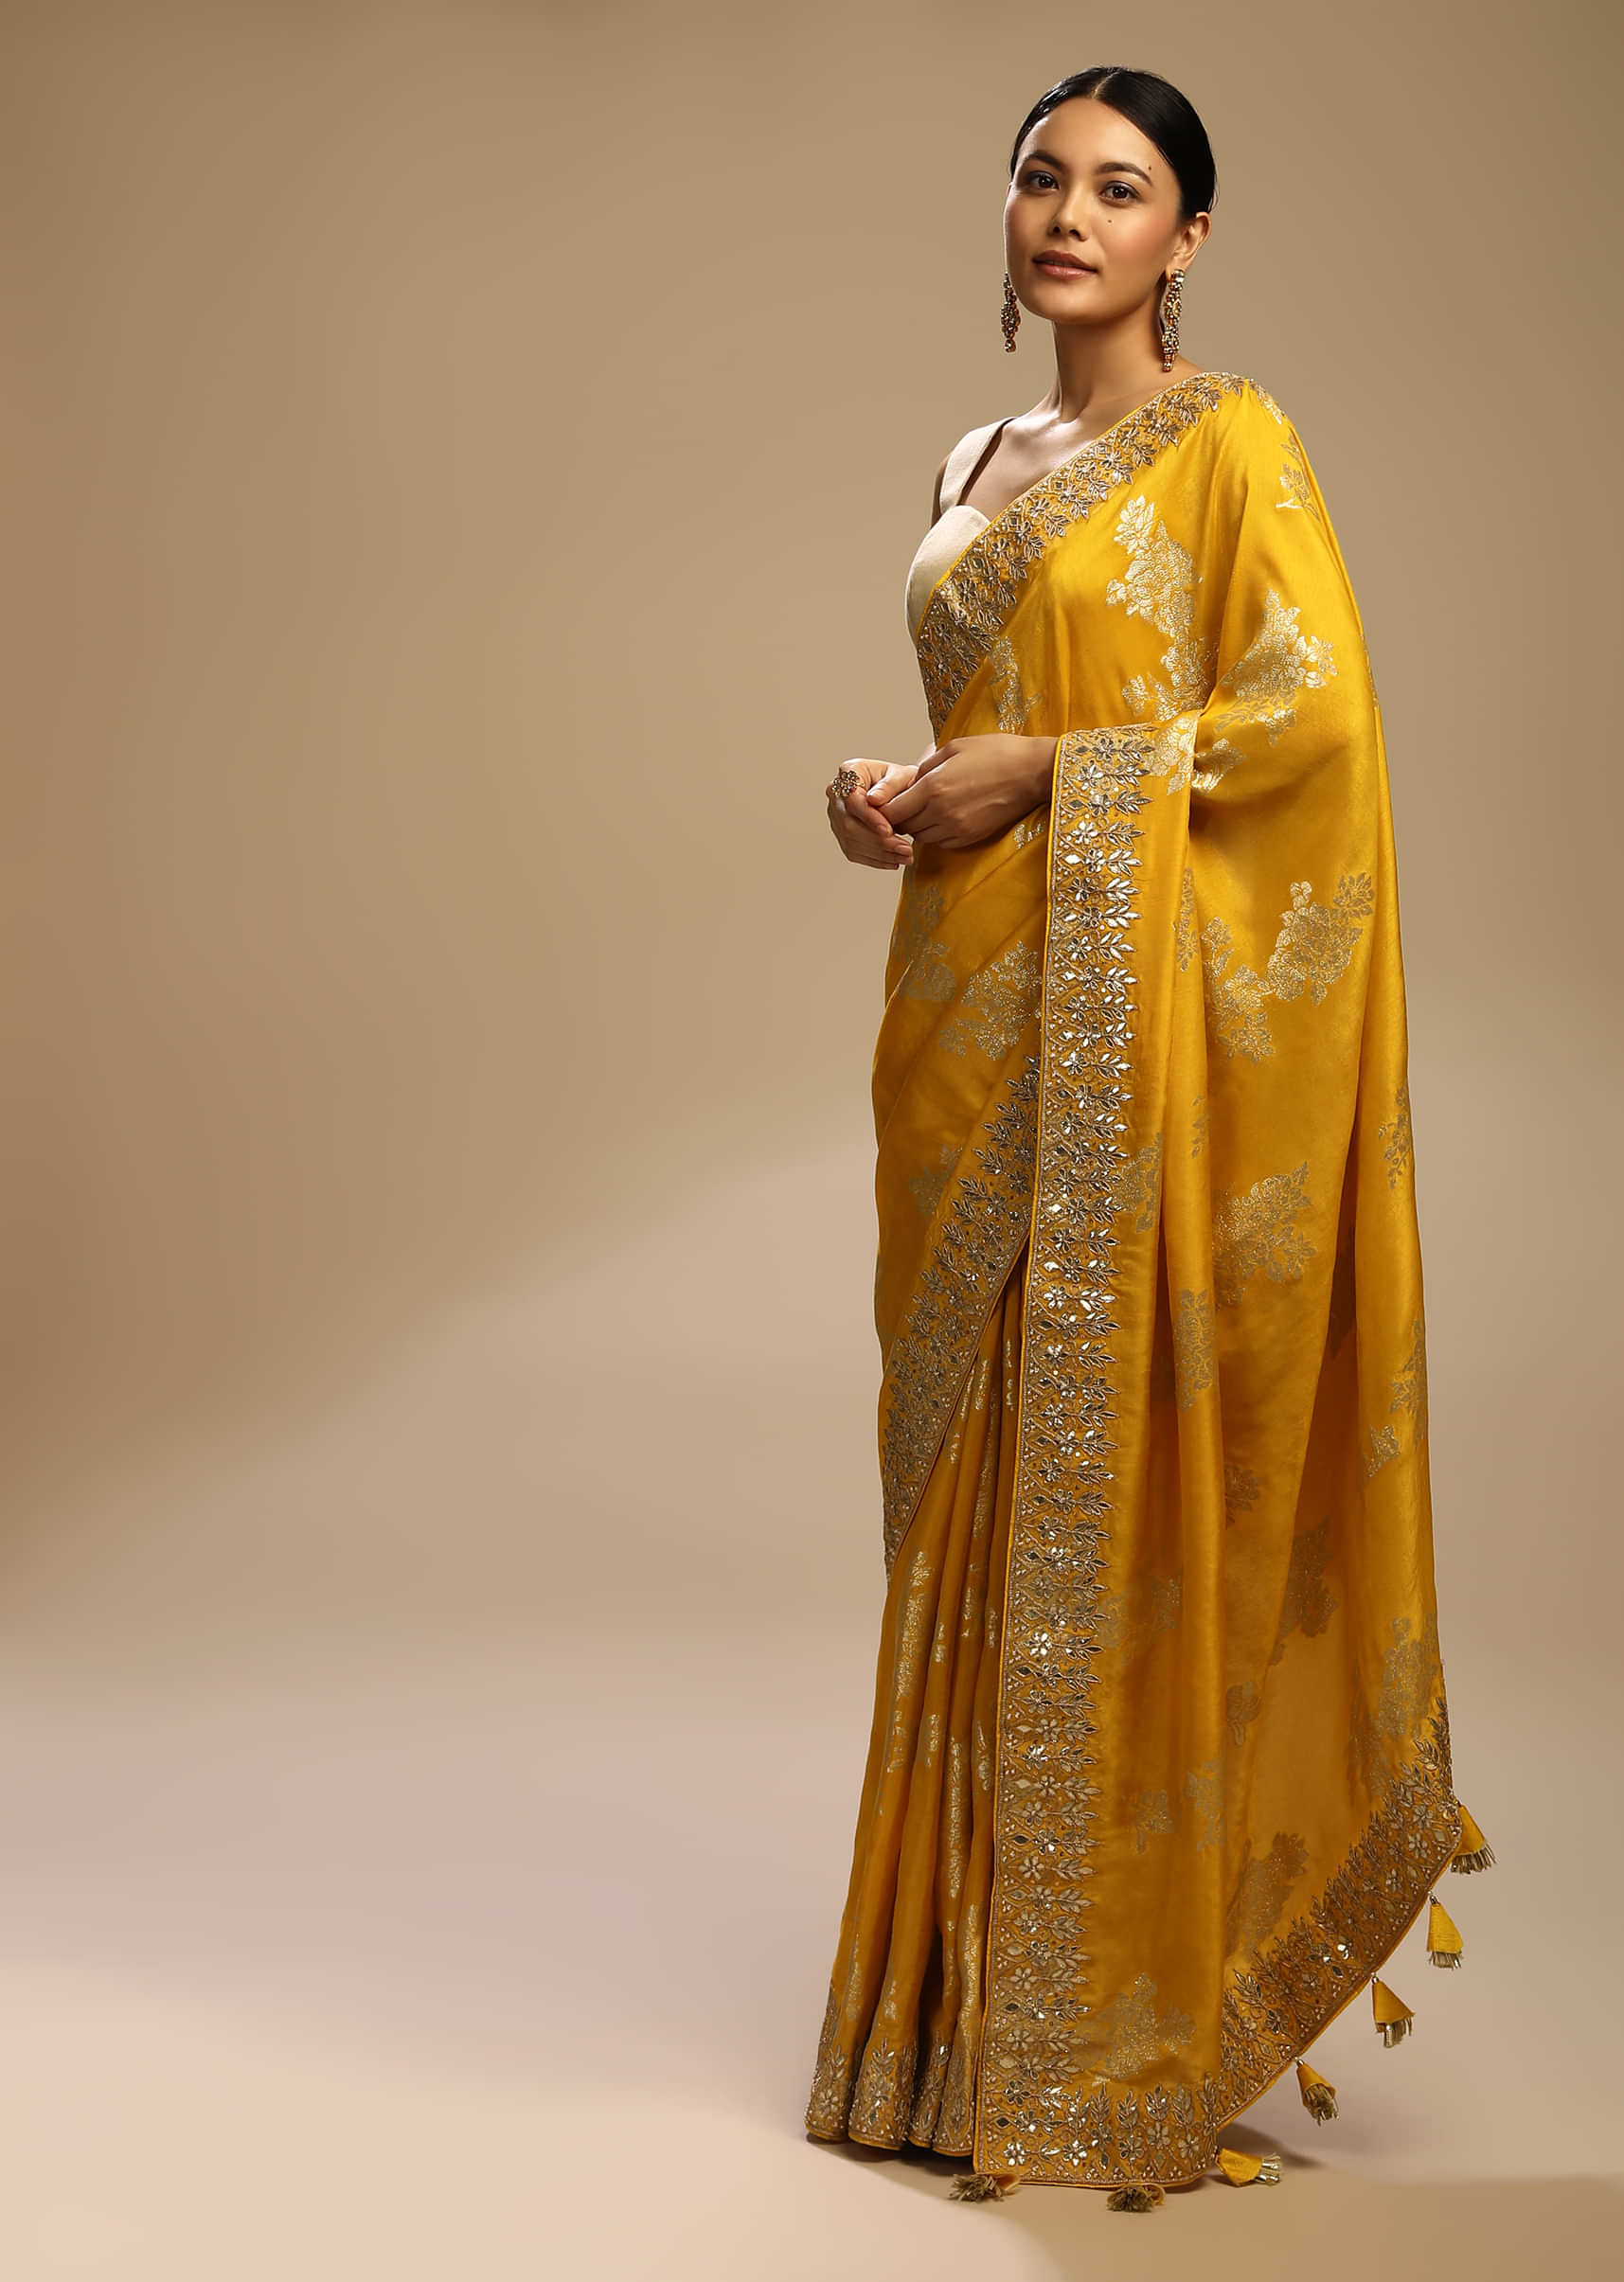 Amber Yellow Saree In Dupion Silk With Woven Floral Motifs And Gotta Embroidered Floral Border